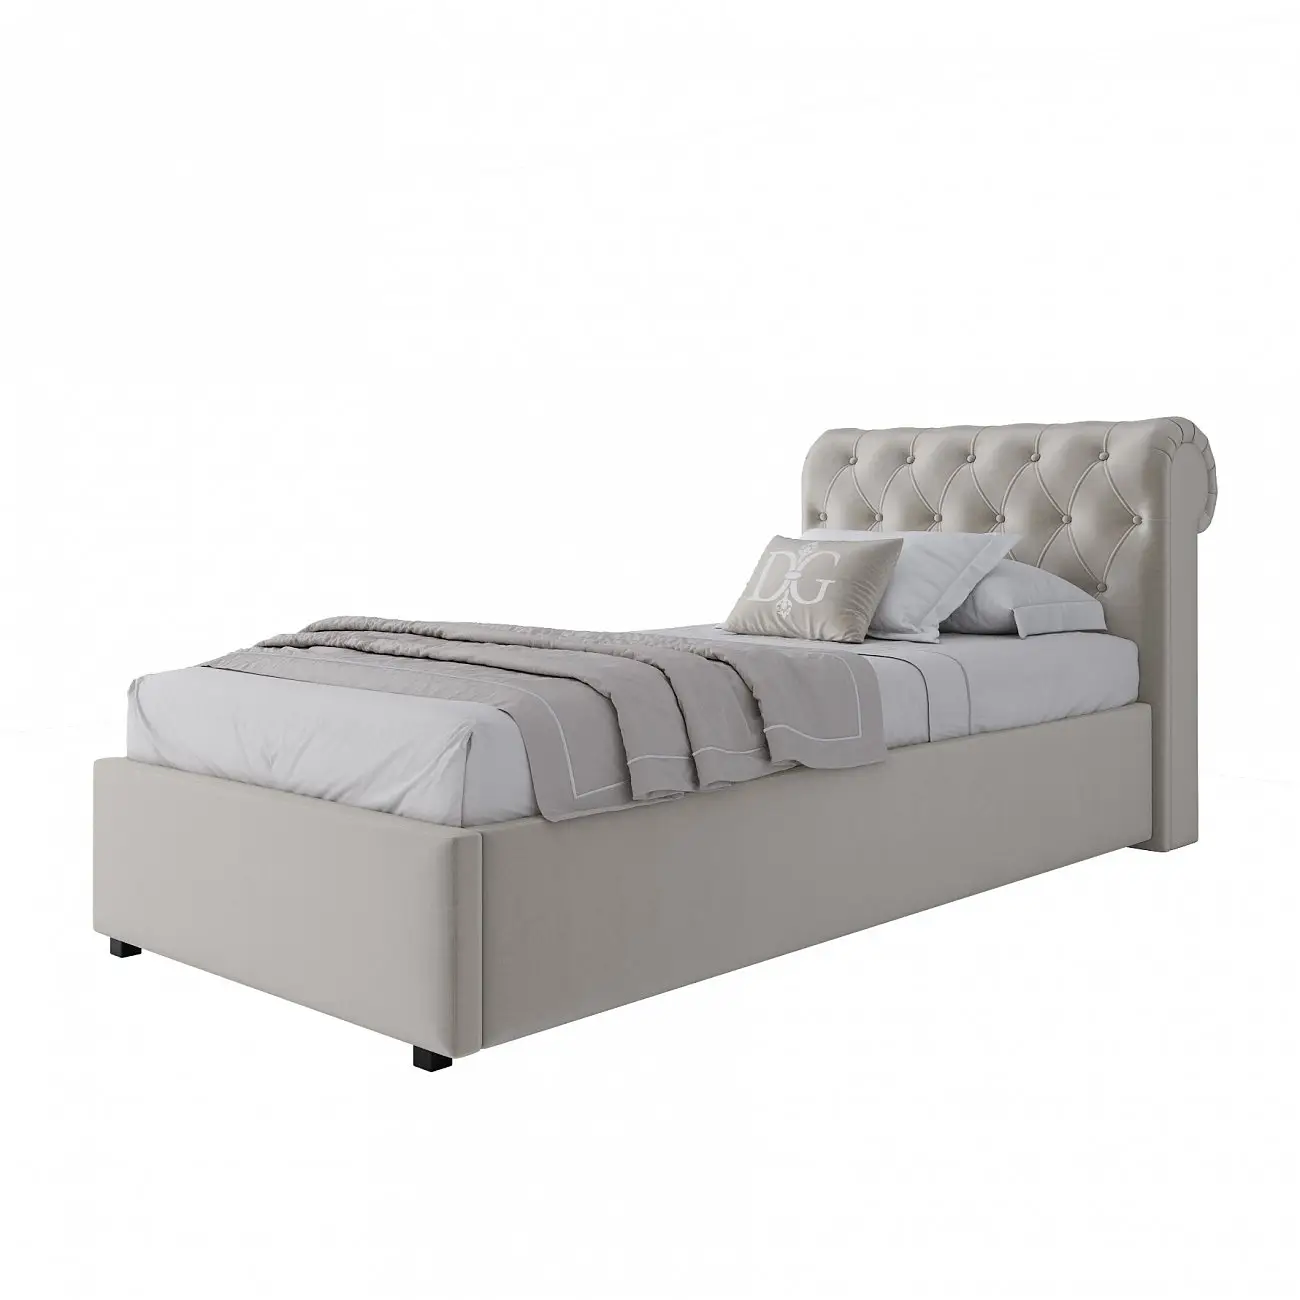 Single bed with upholstered headboard 90x200 cm milk Sweet Dreams